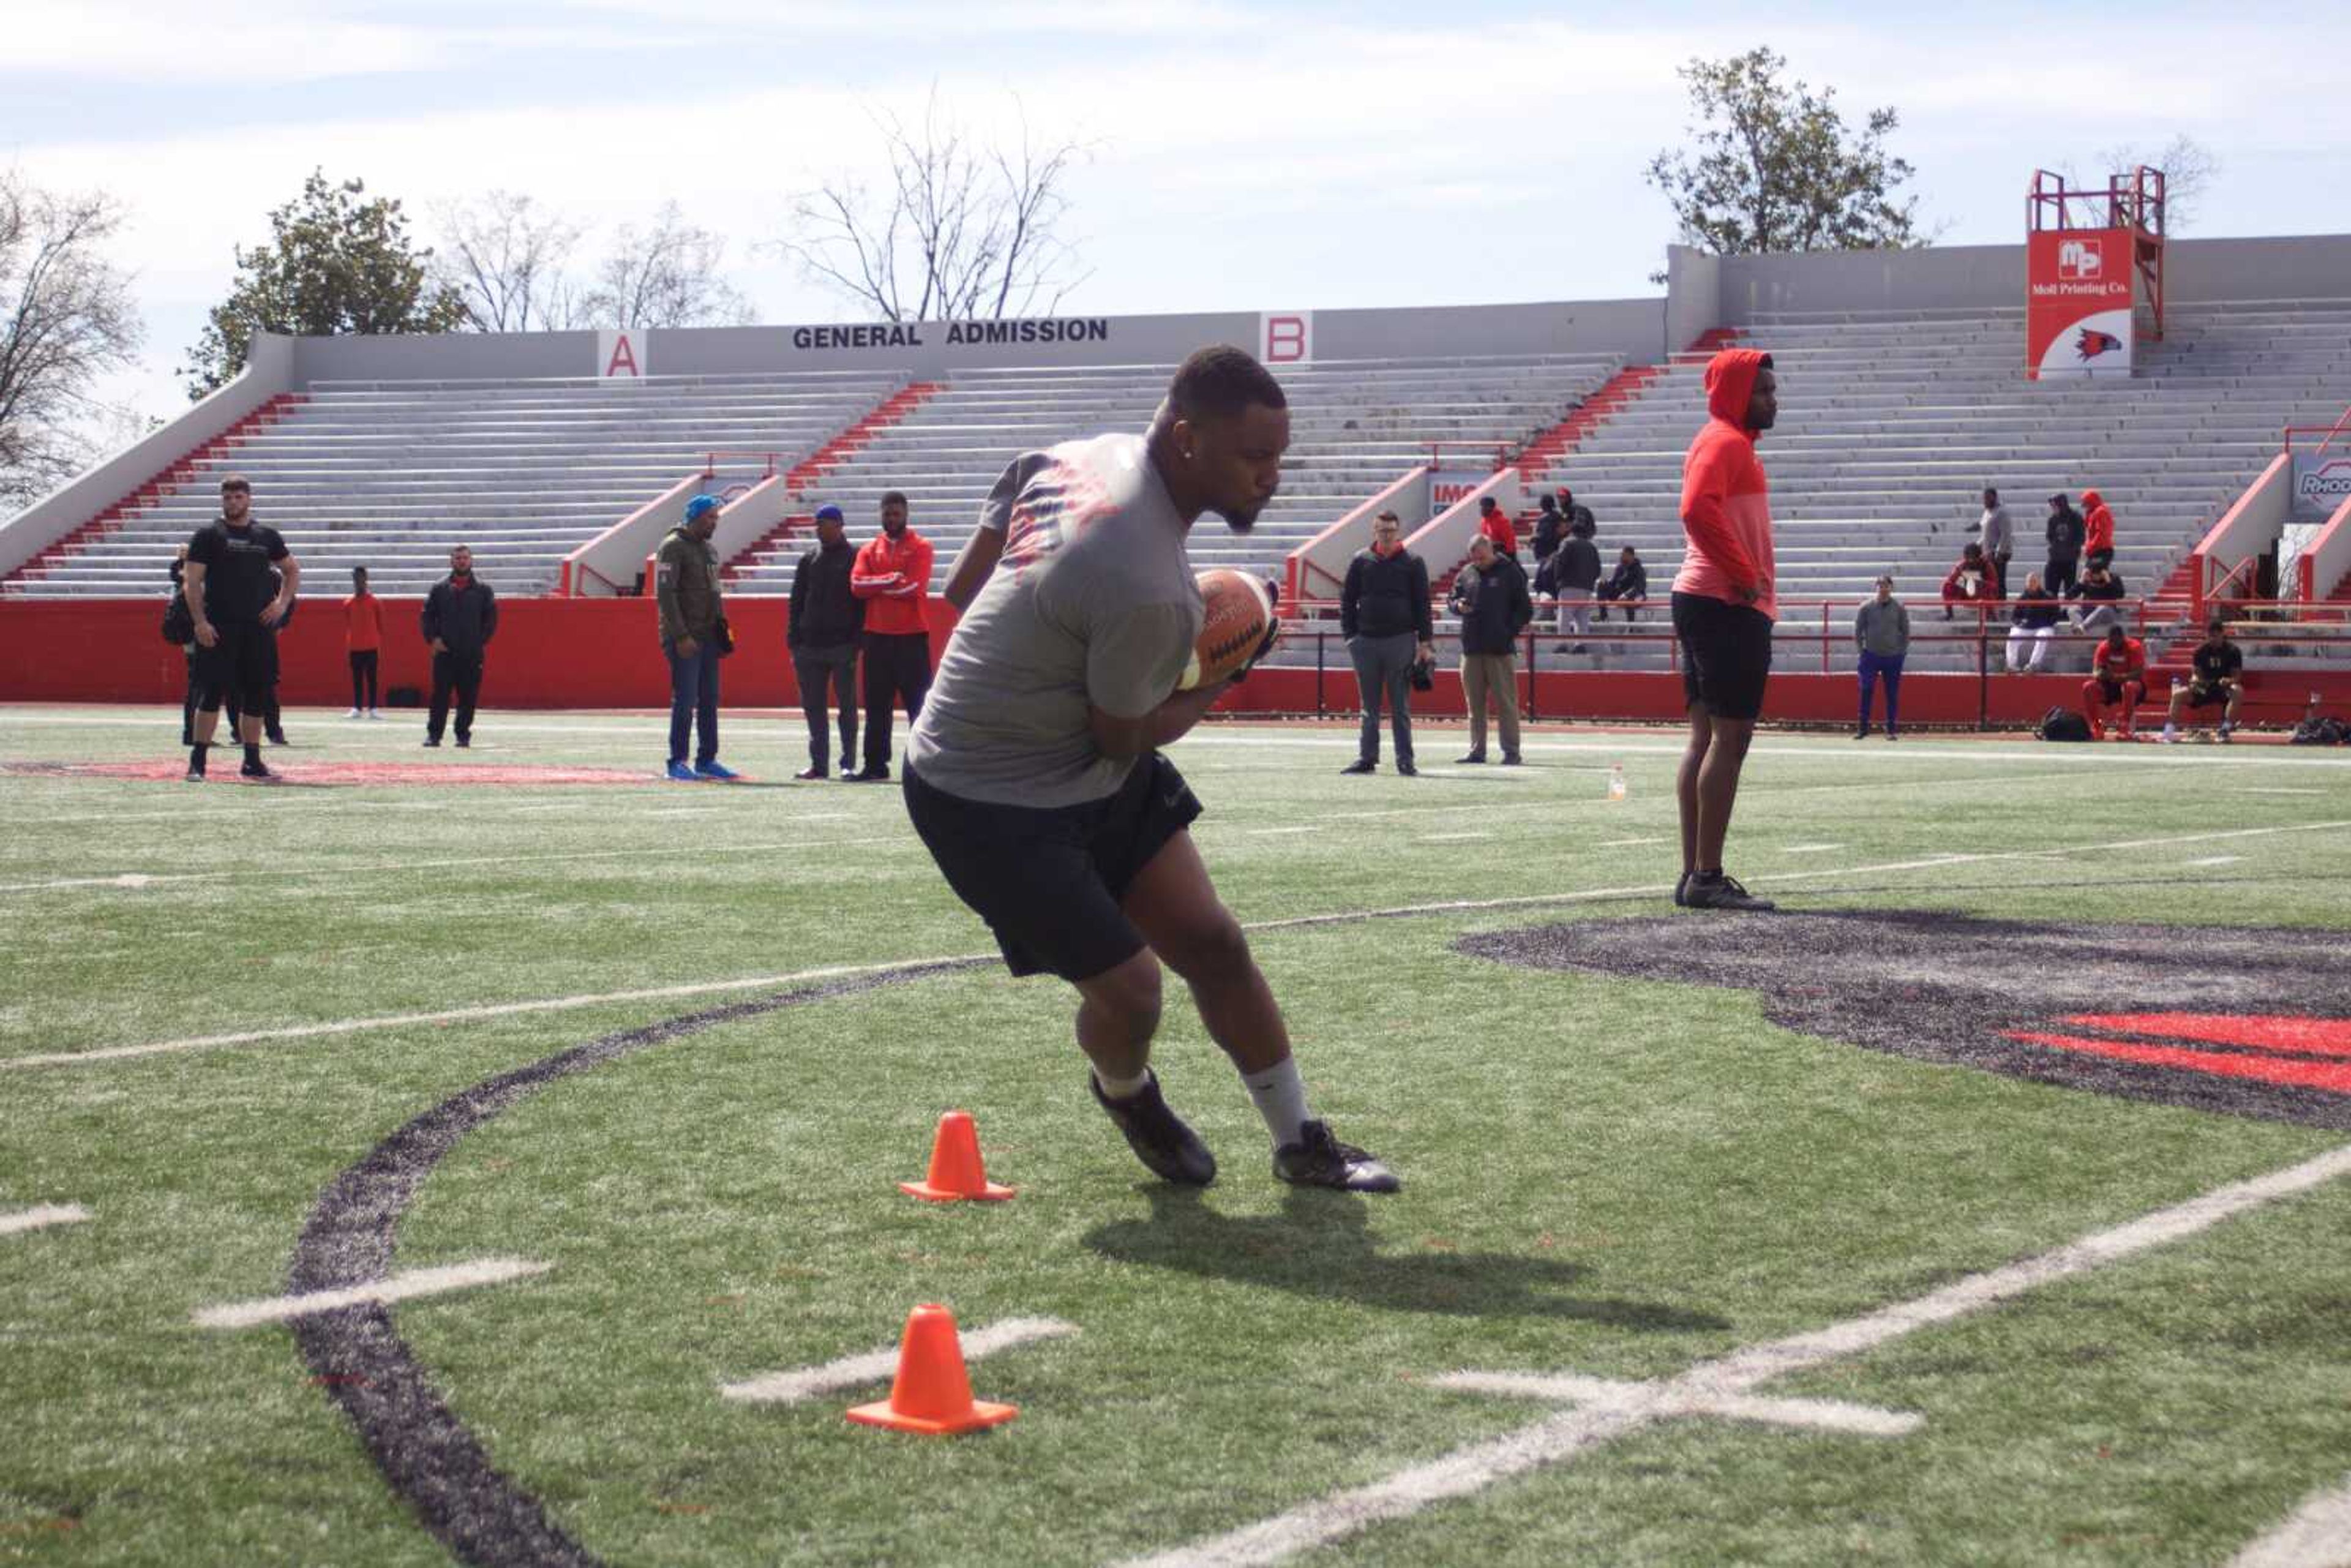 Senior running back Marquis Terry cuts between cones during a position drill at Southeast's pro day on March 26.